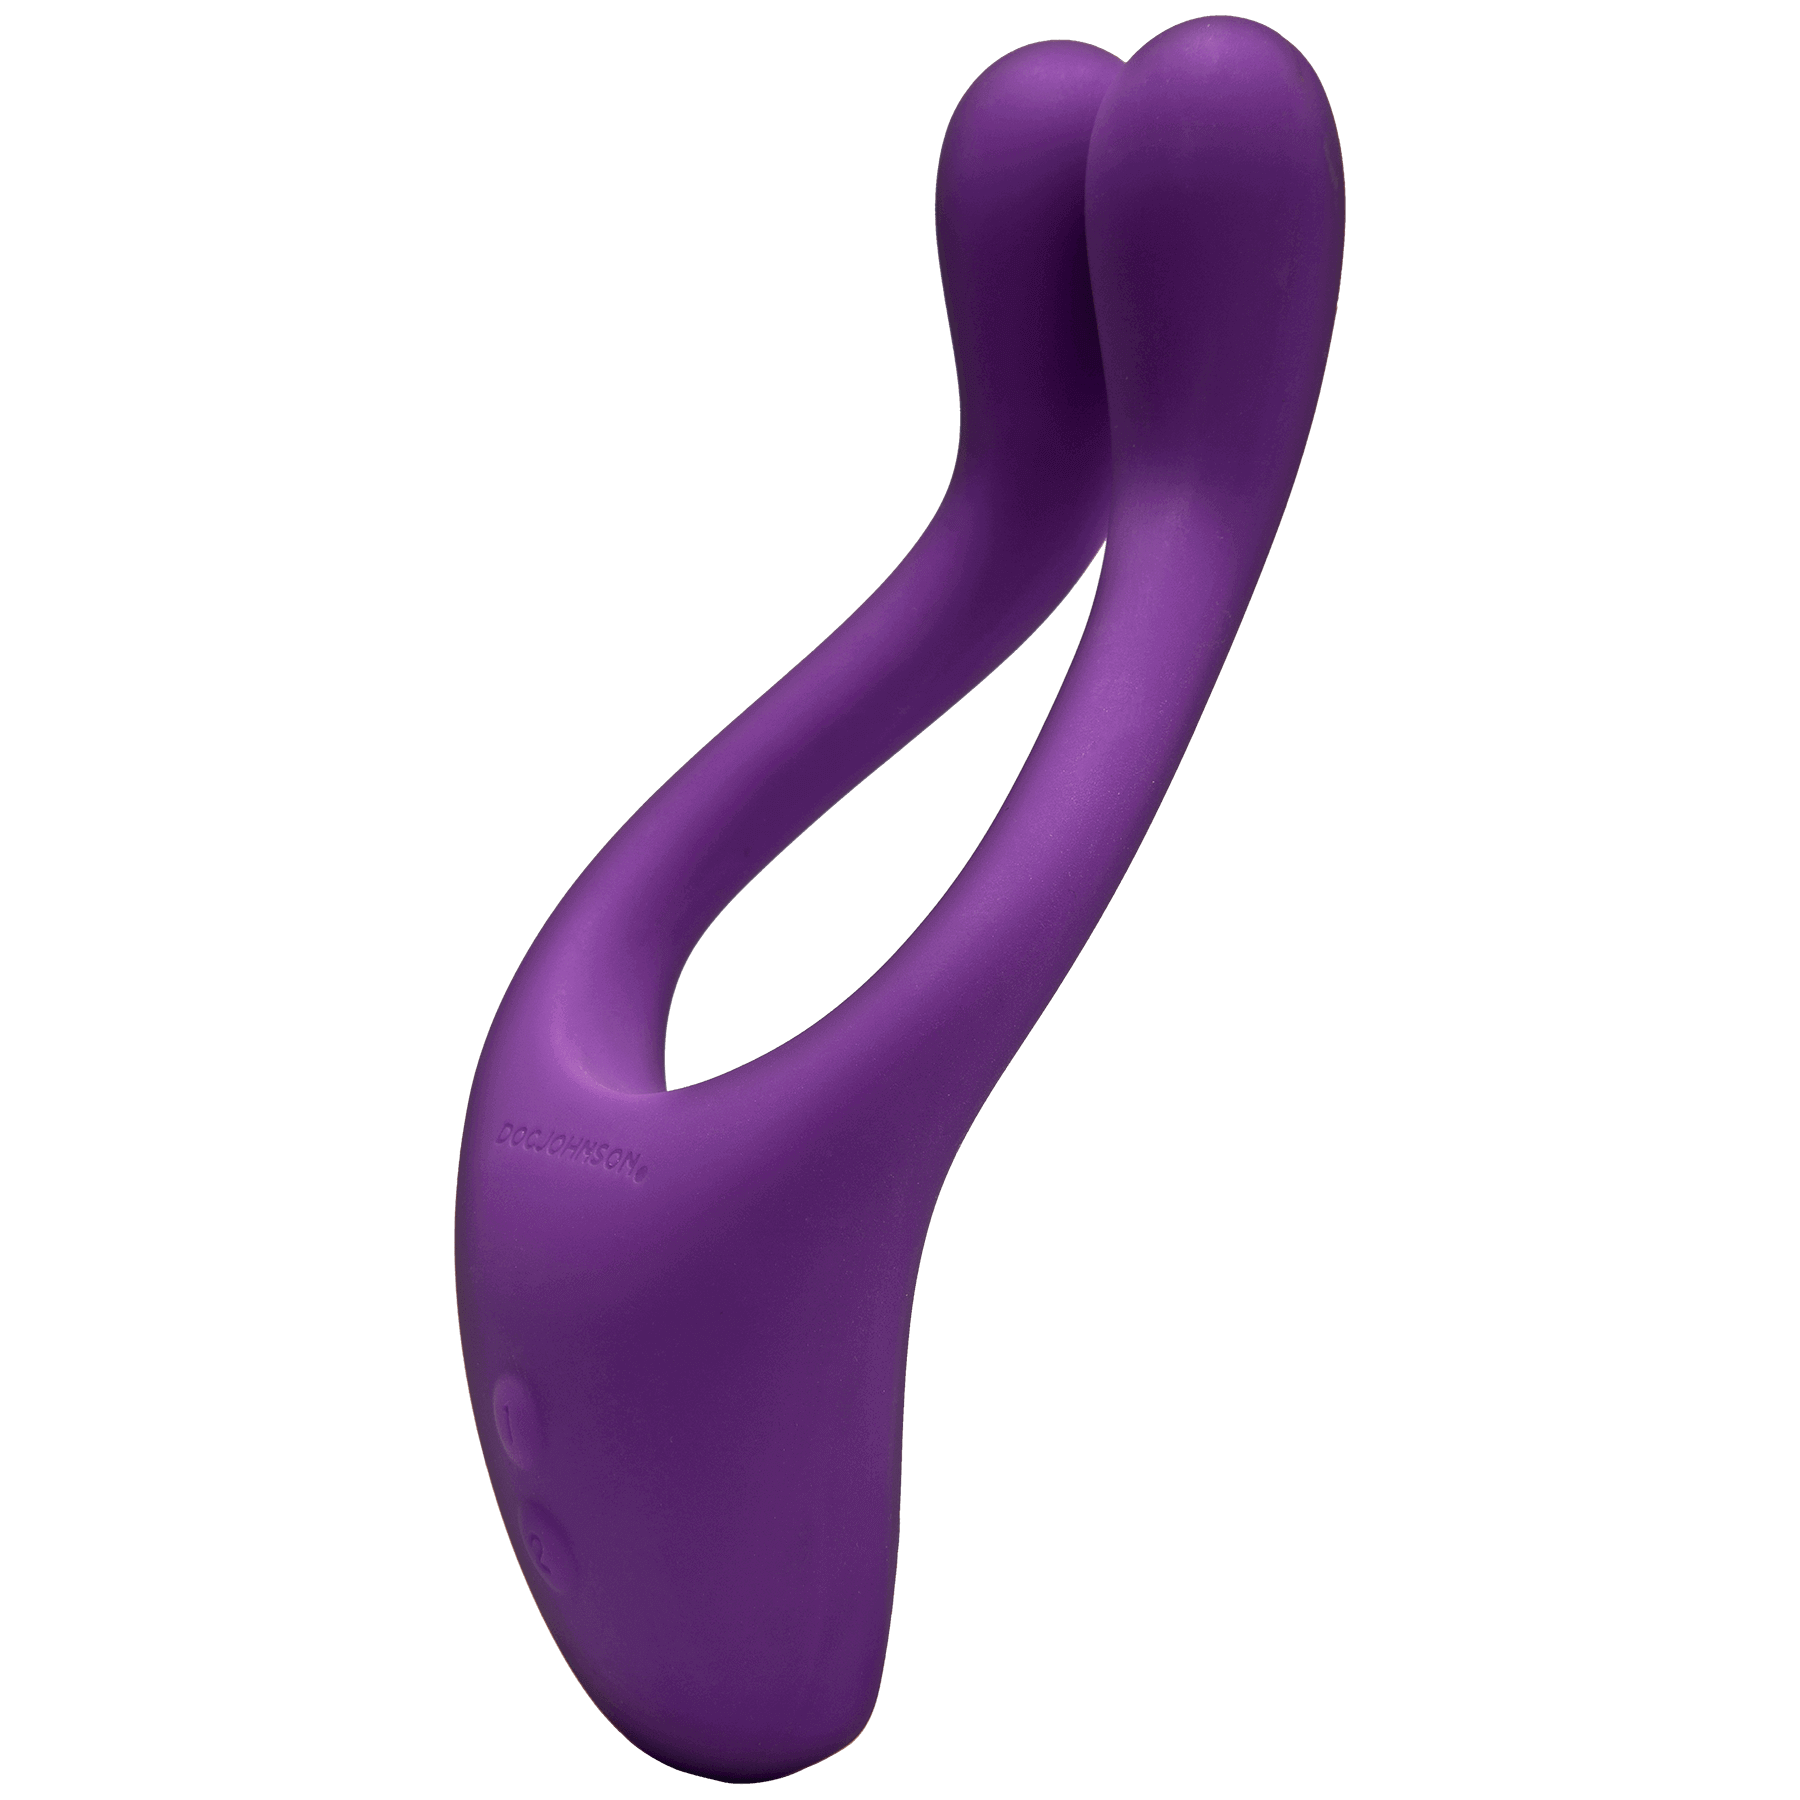 Tryst Multi Erogenous Zone Massager in purple - Doc Johnson - by The Bigger O - an online sex toy shop. We ship to USA, Canada and the UK.